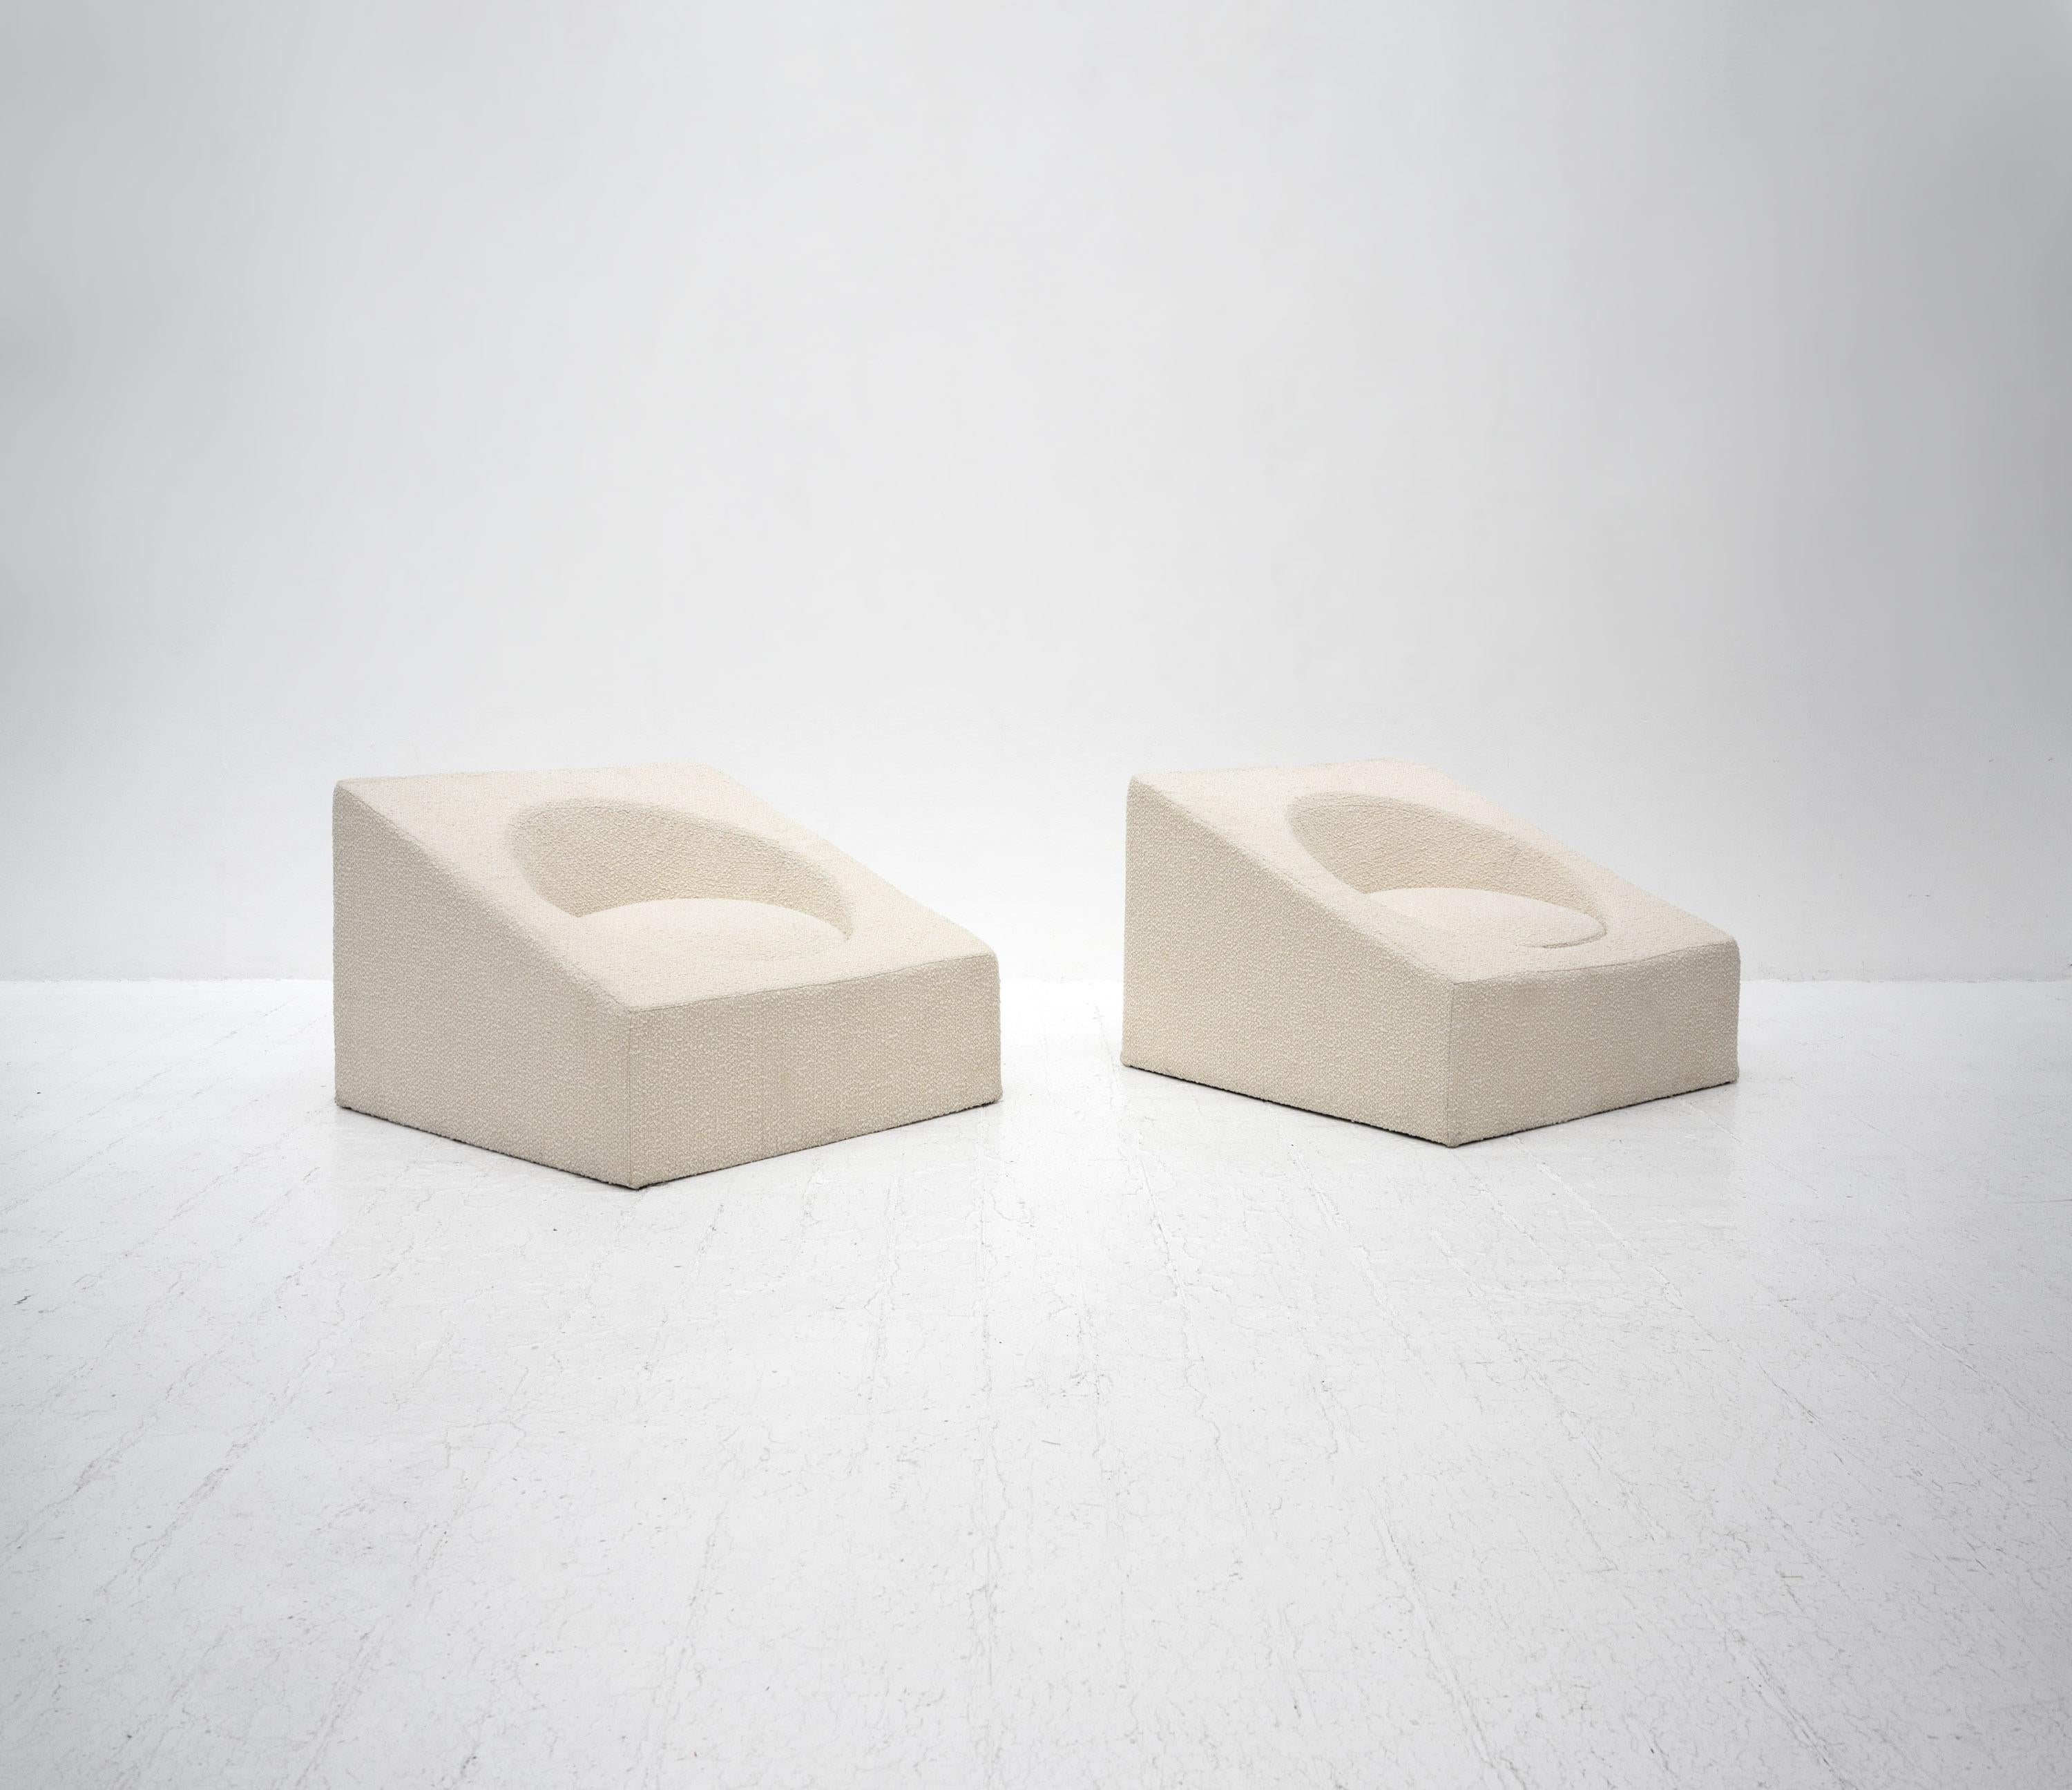 Late 20th Century Italian lounge chairs composed from sculpted foam on a wooden base, upholstered in an off white boucle fabric. The chairs are very comfortable. 

There are two chairs available, price is per chair. 

Dimensions (cm,